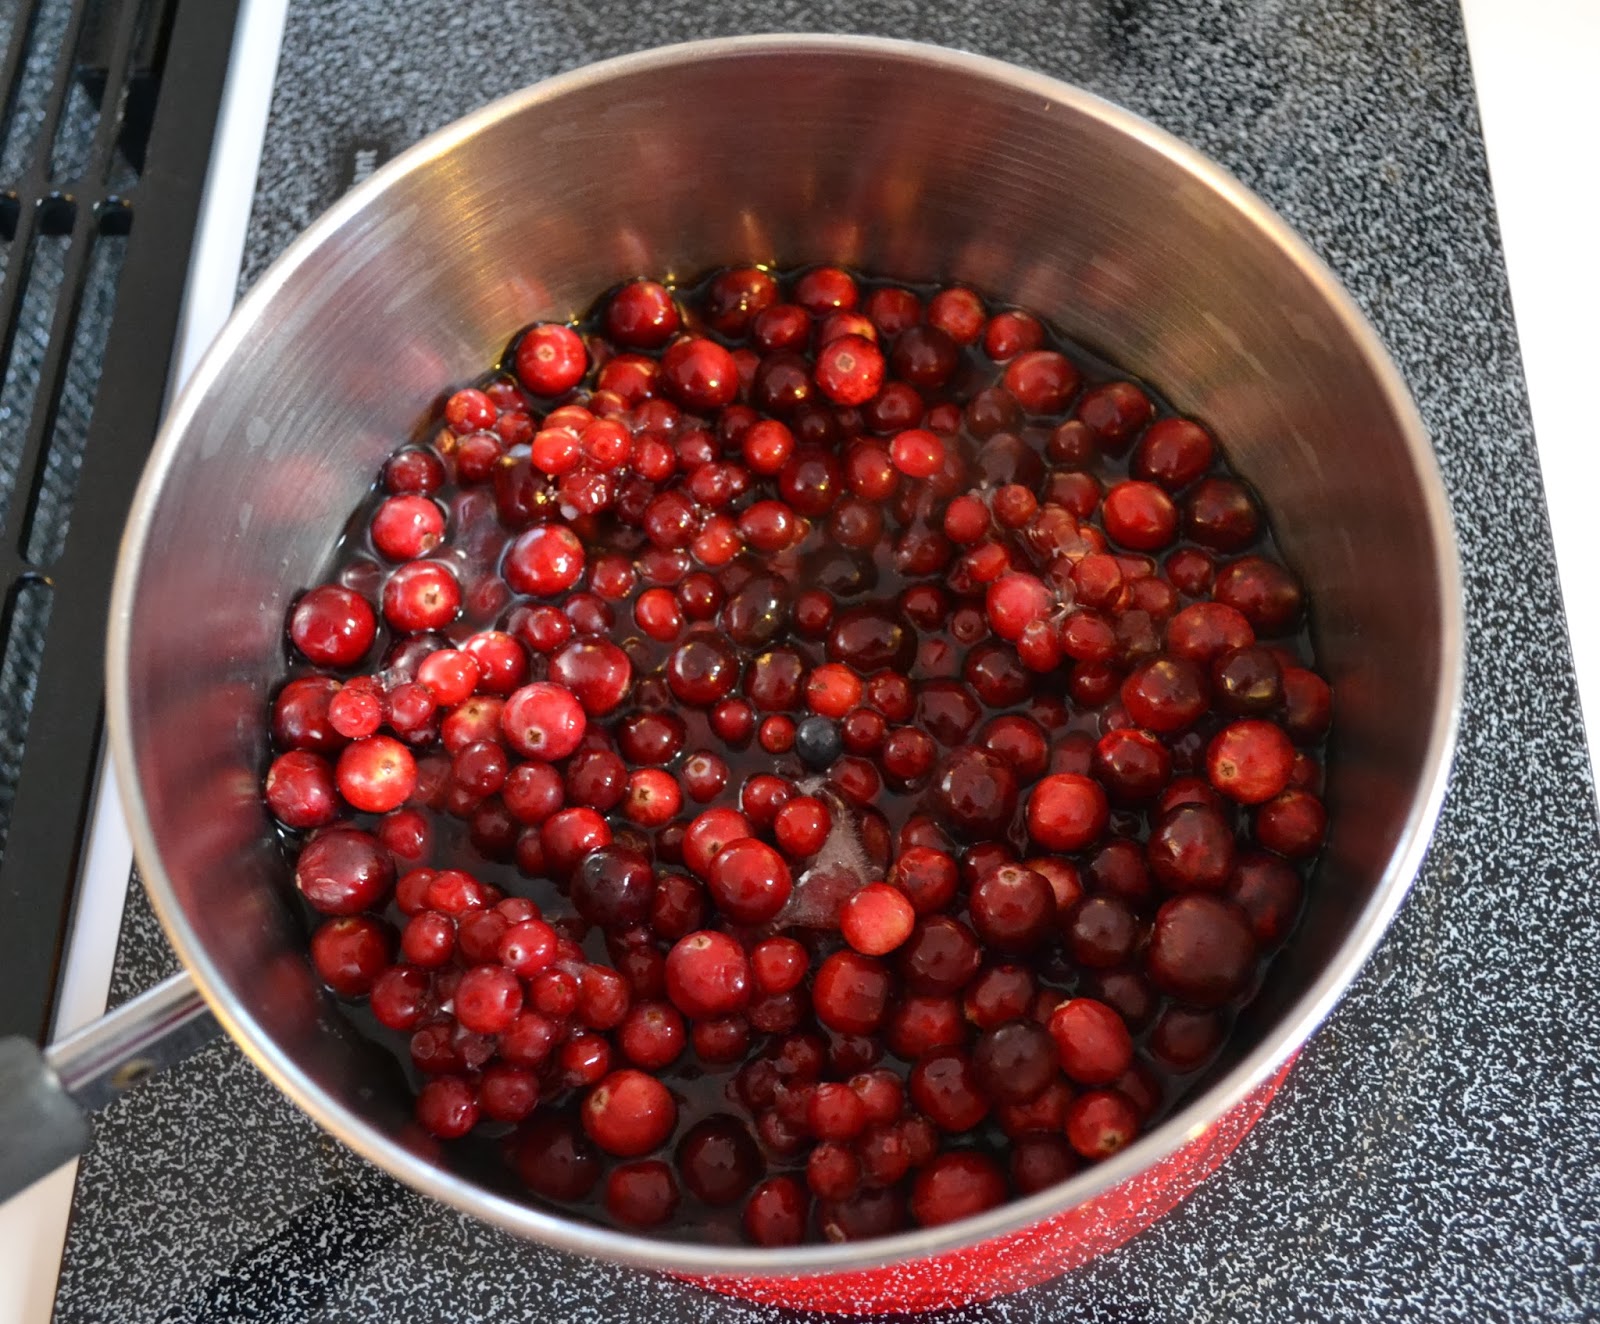 Run 'n Stitch: Spiced Lingonberry Sauce